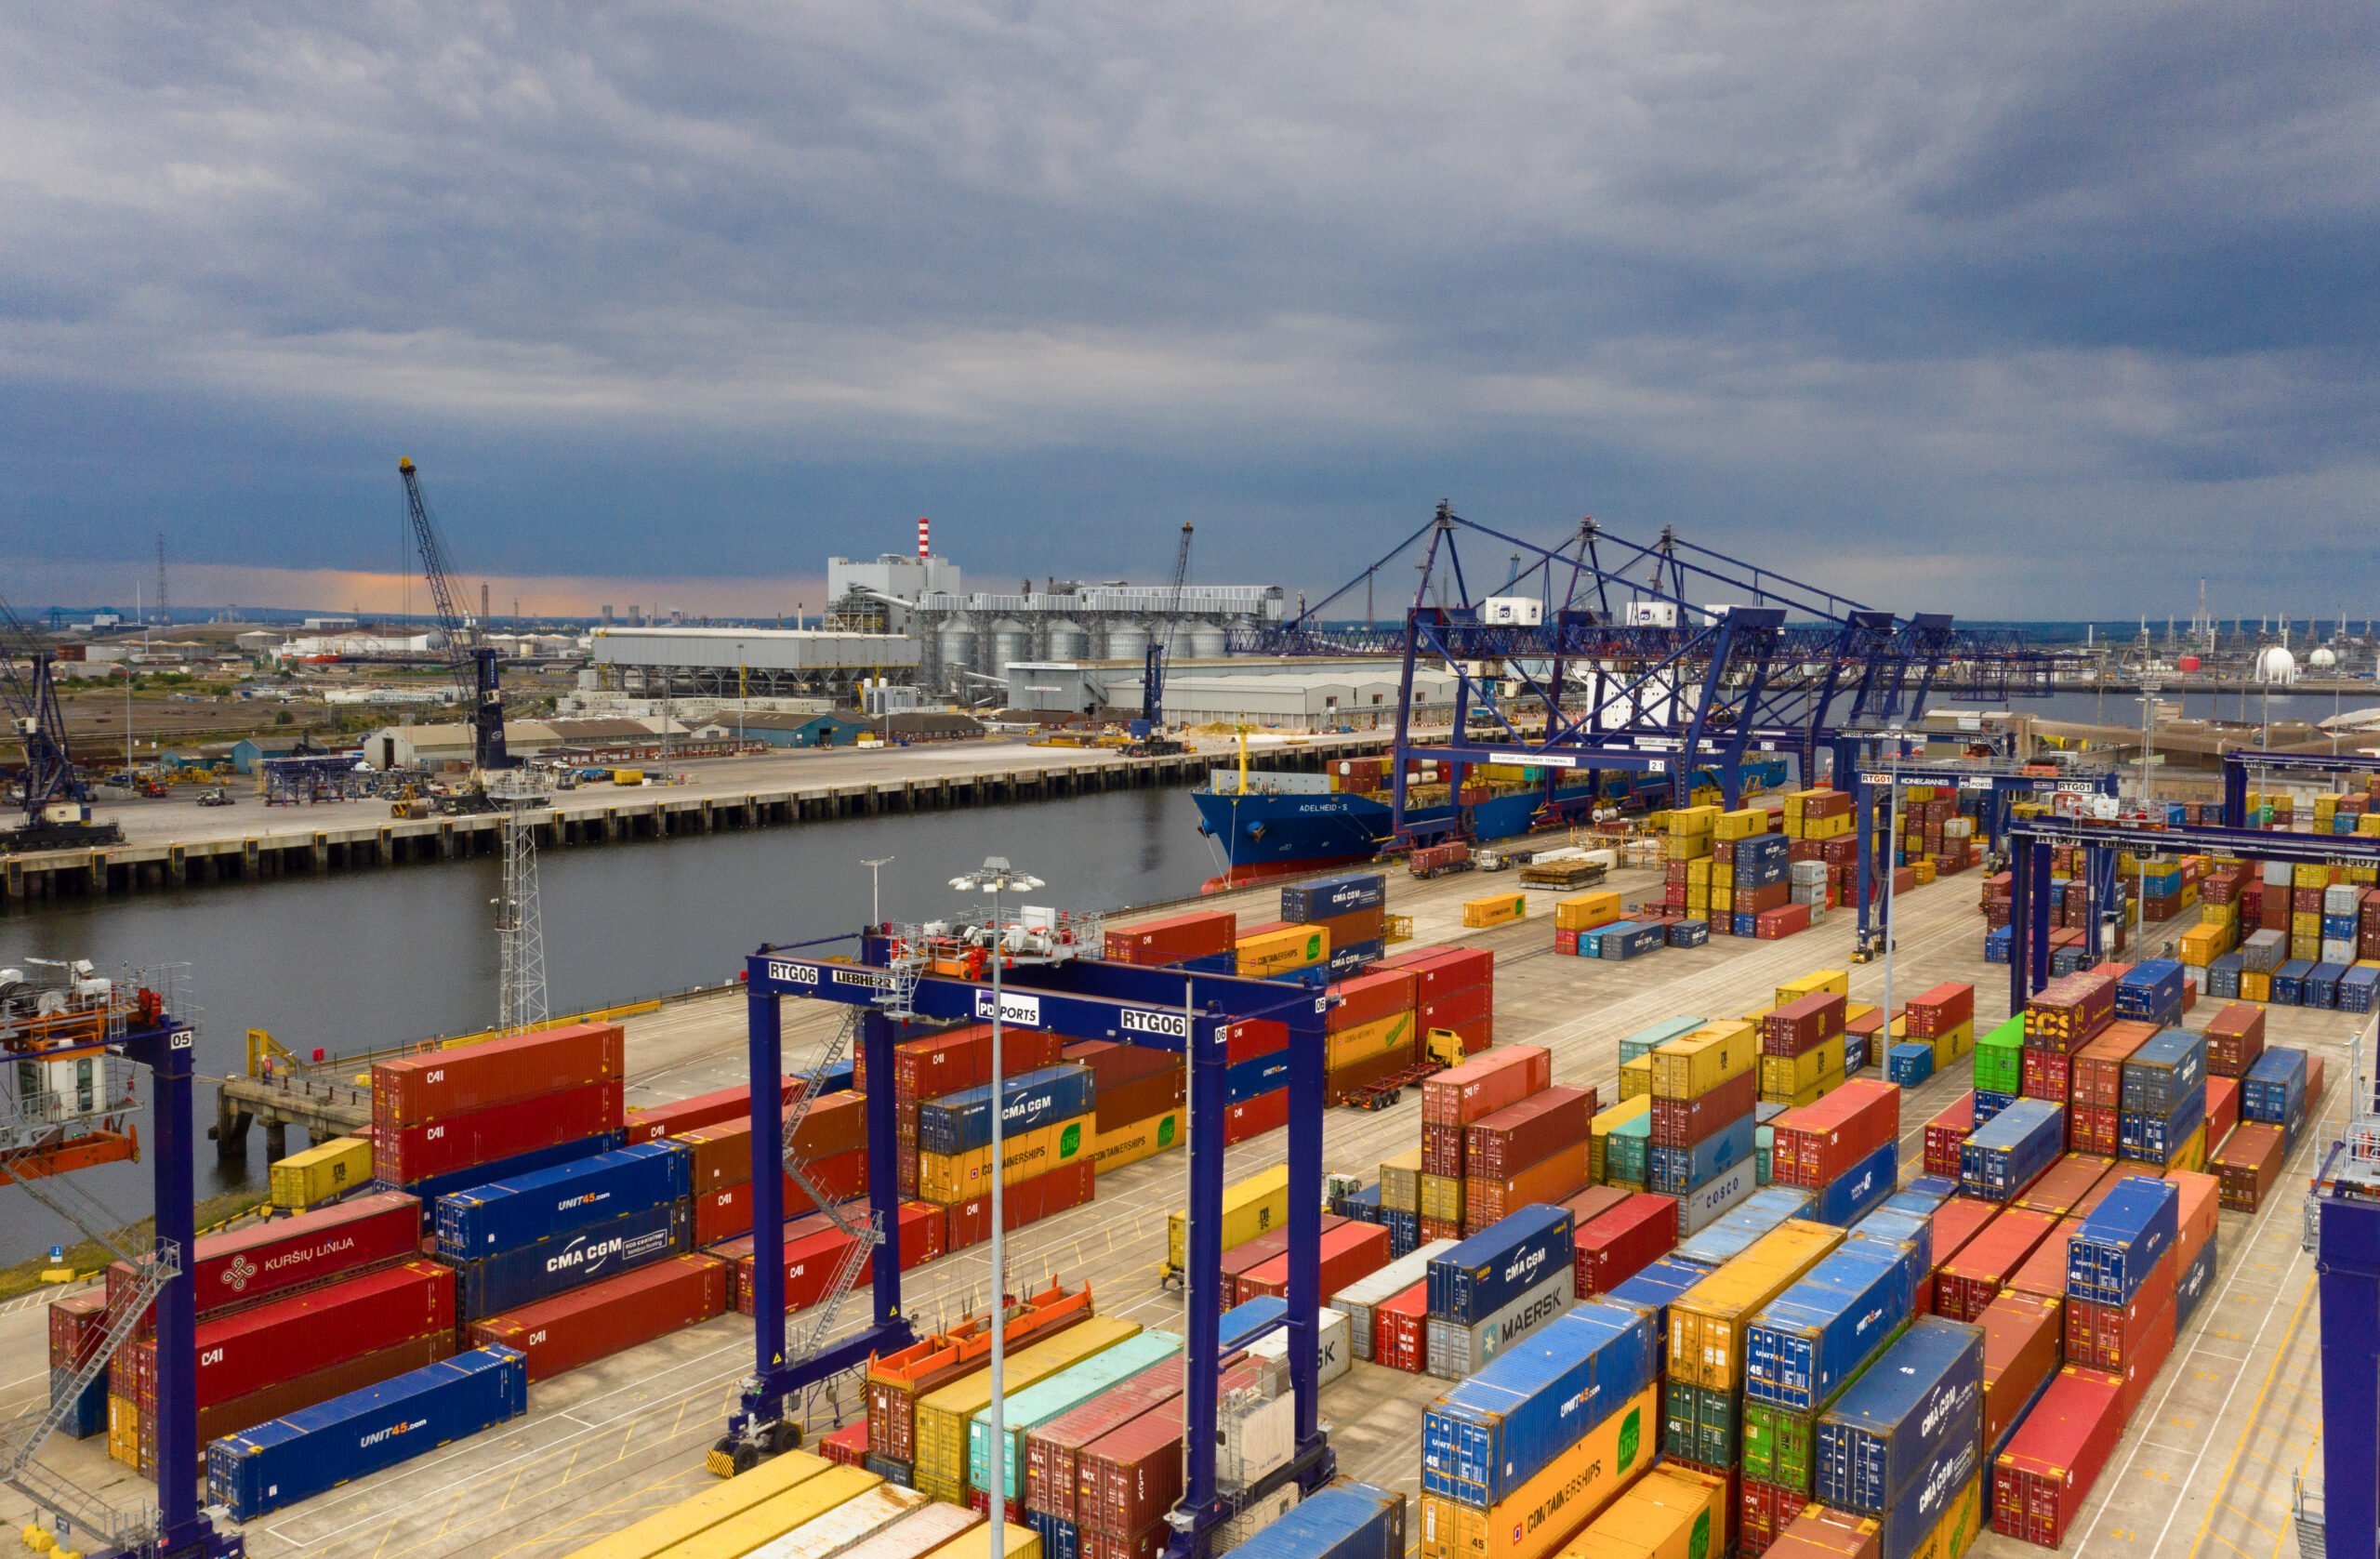 Case Study: Overcoming Connectivity Issues at PD Ports